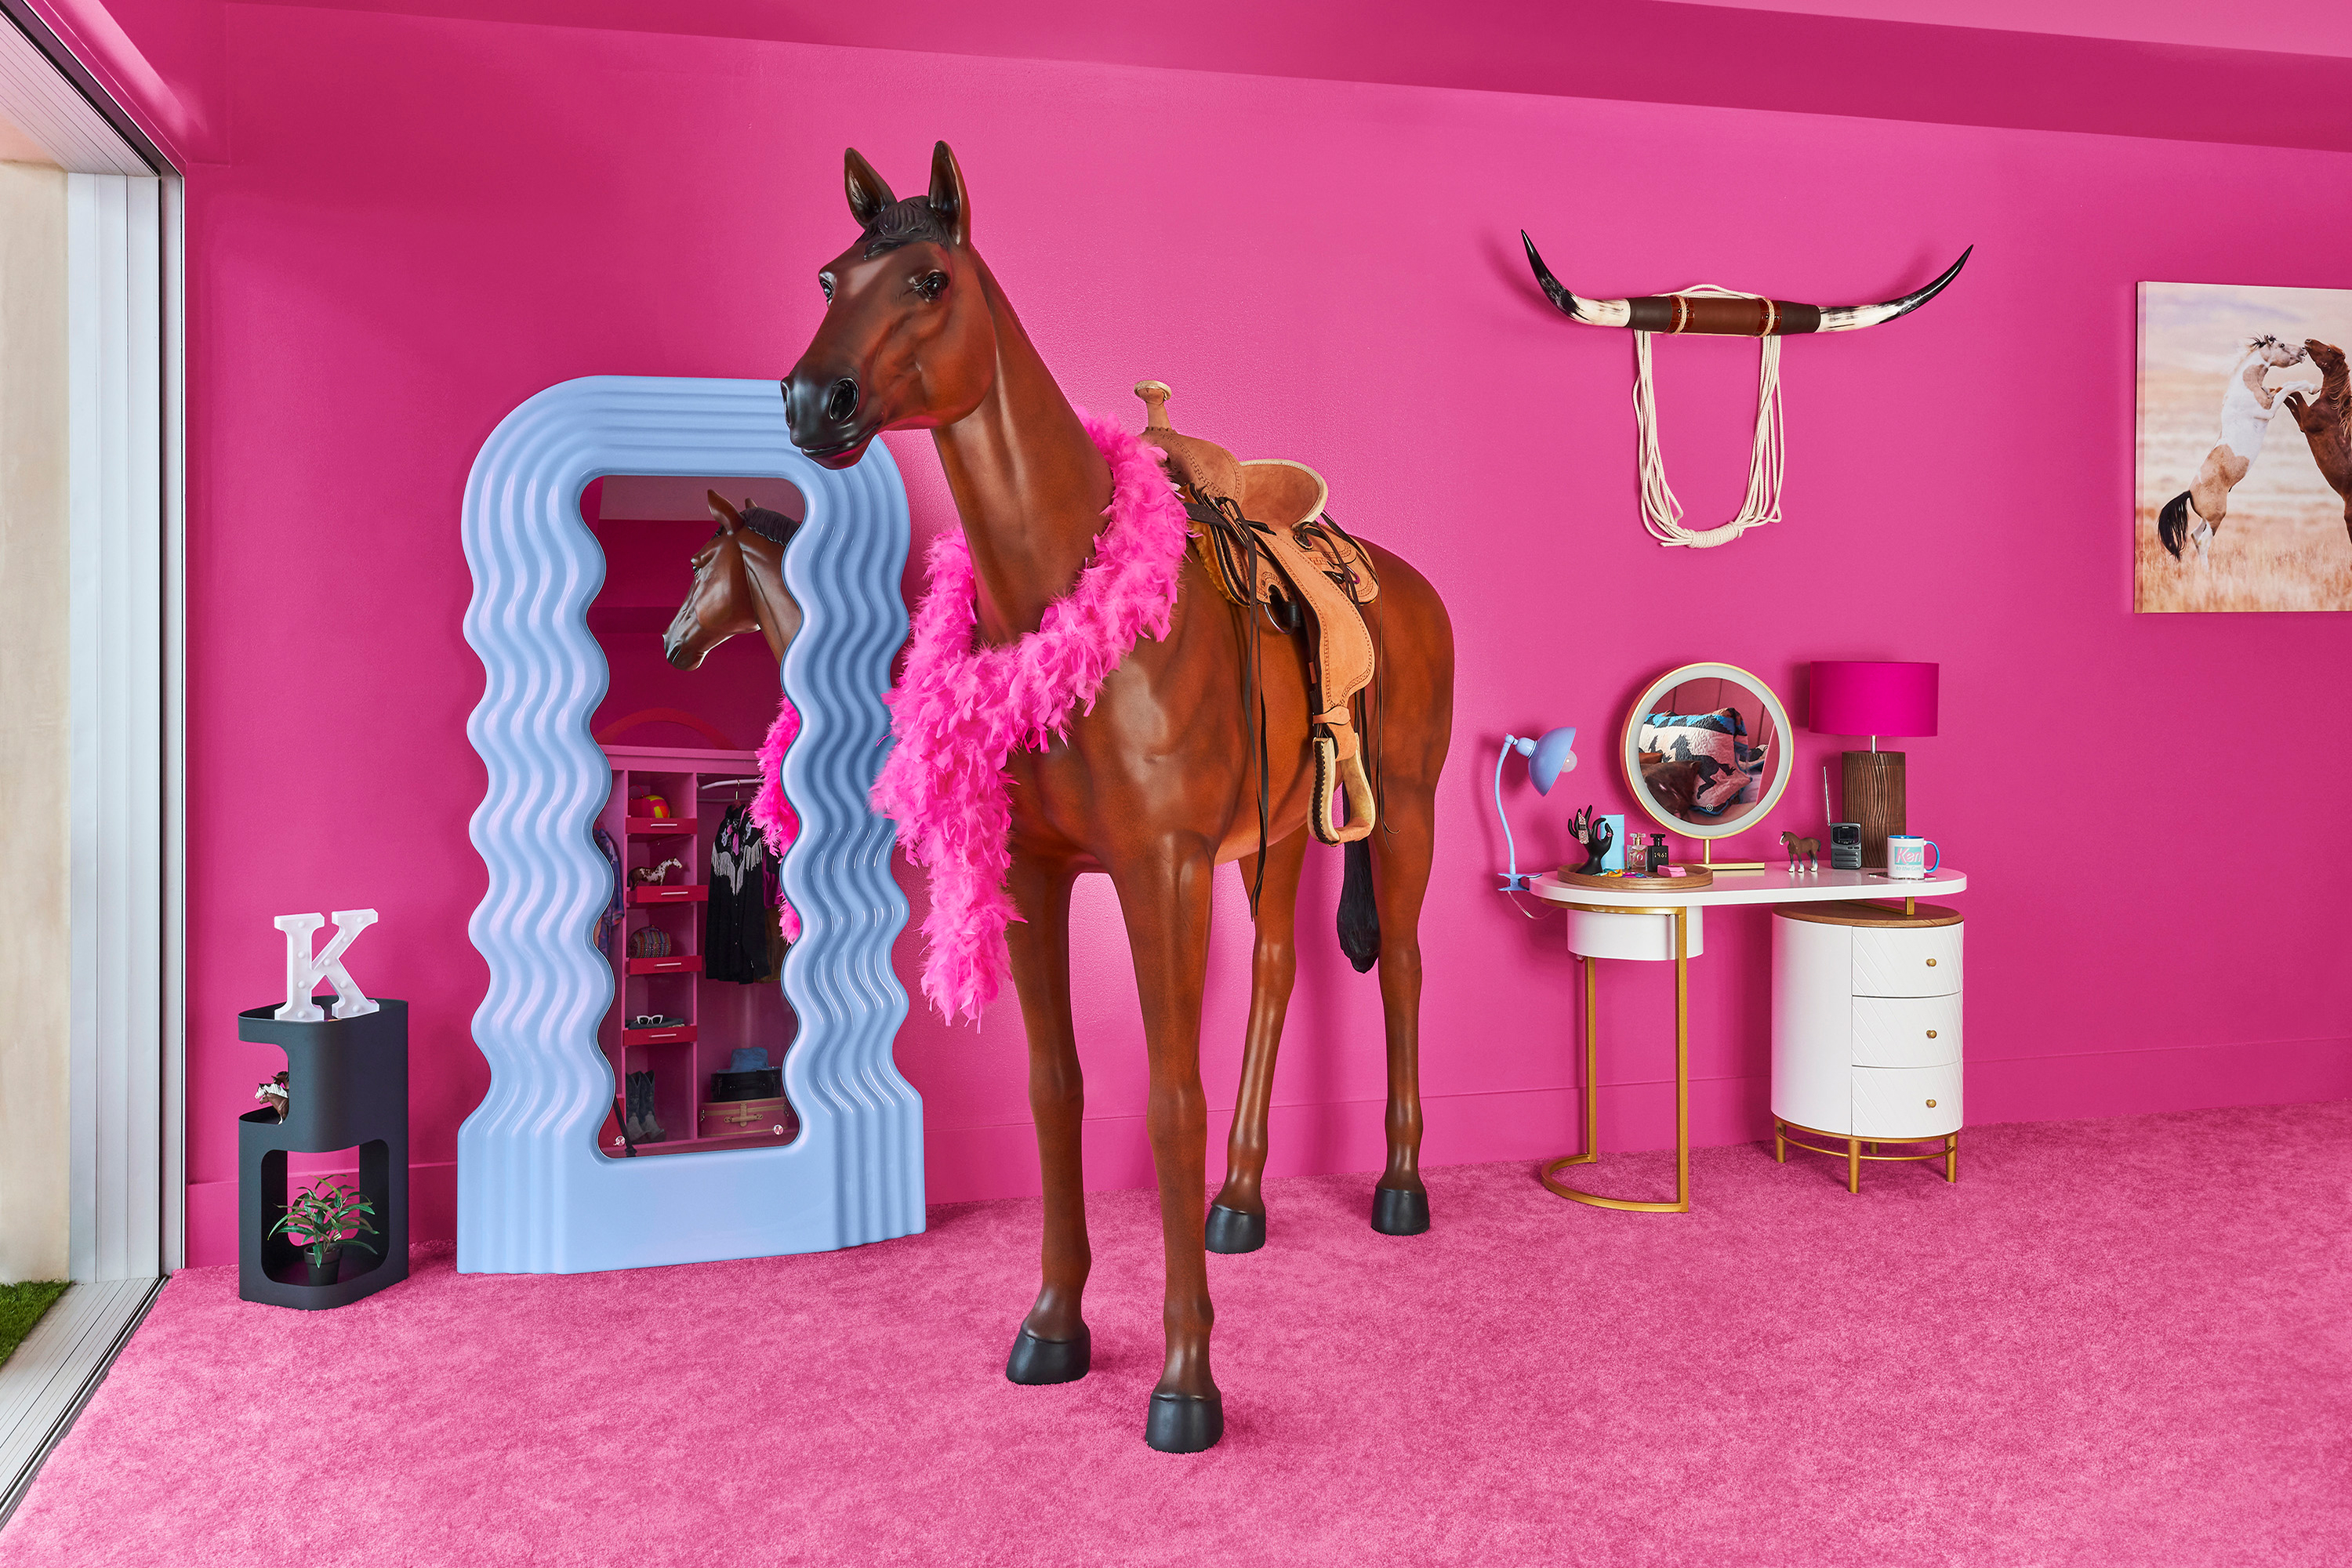 A lifesize horse figurine in front of a mirror